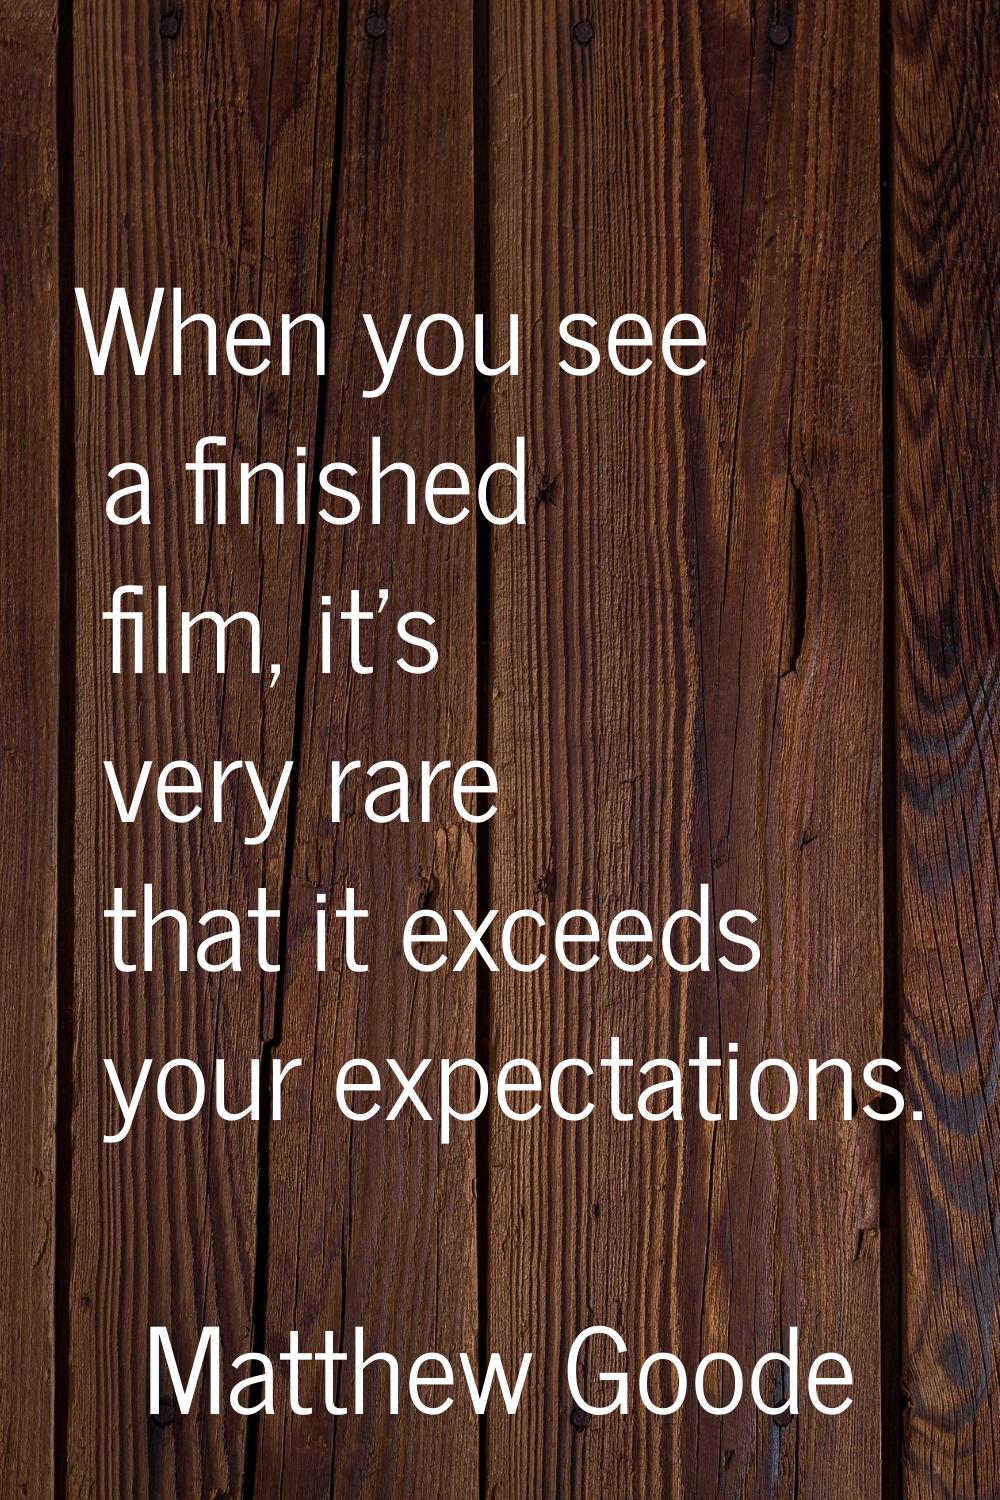 When you see a finished film, it's very rare that it exceeds your expectations.